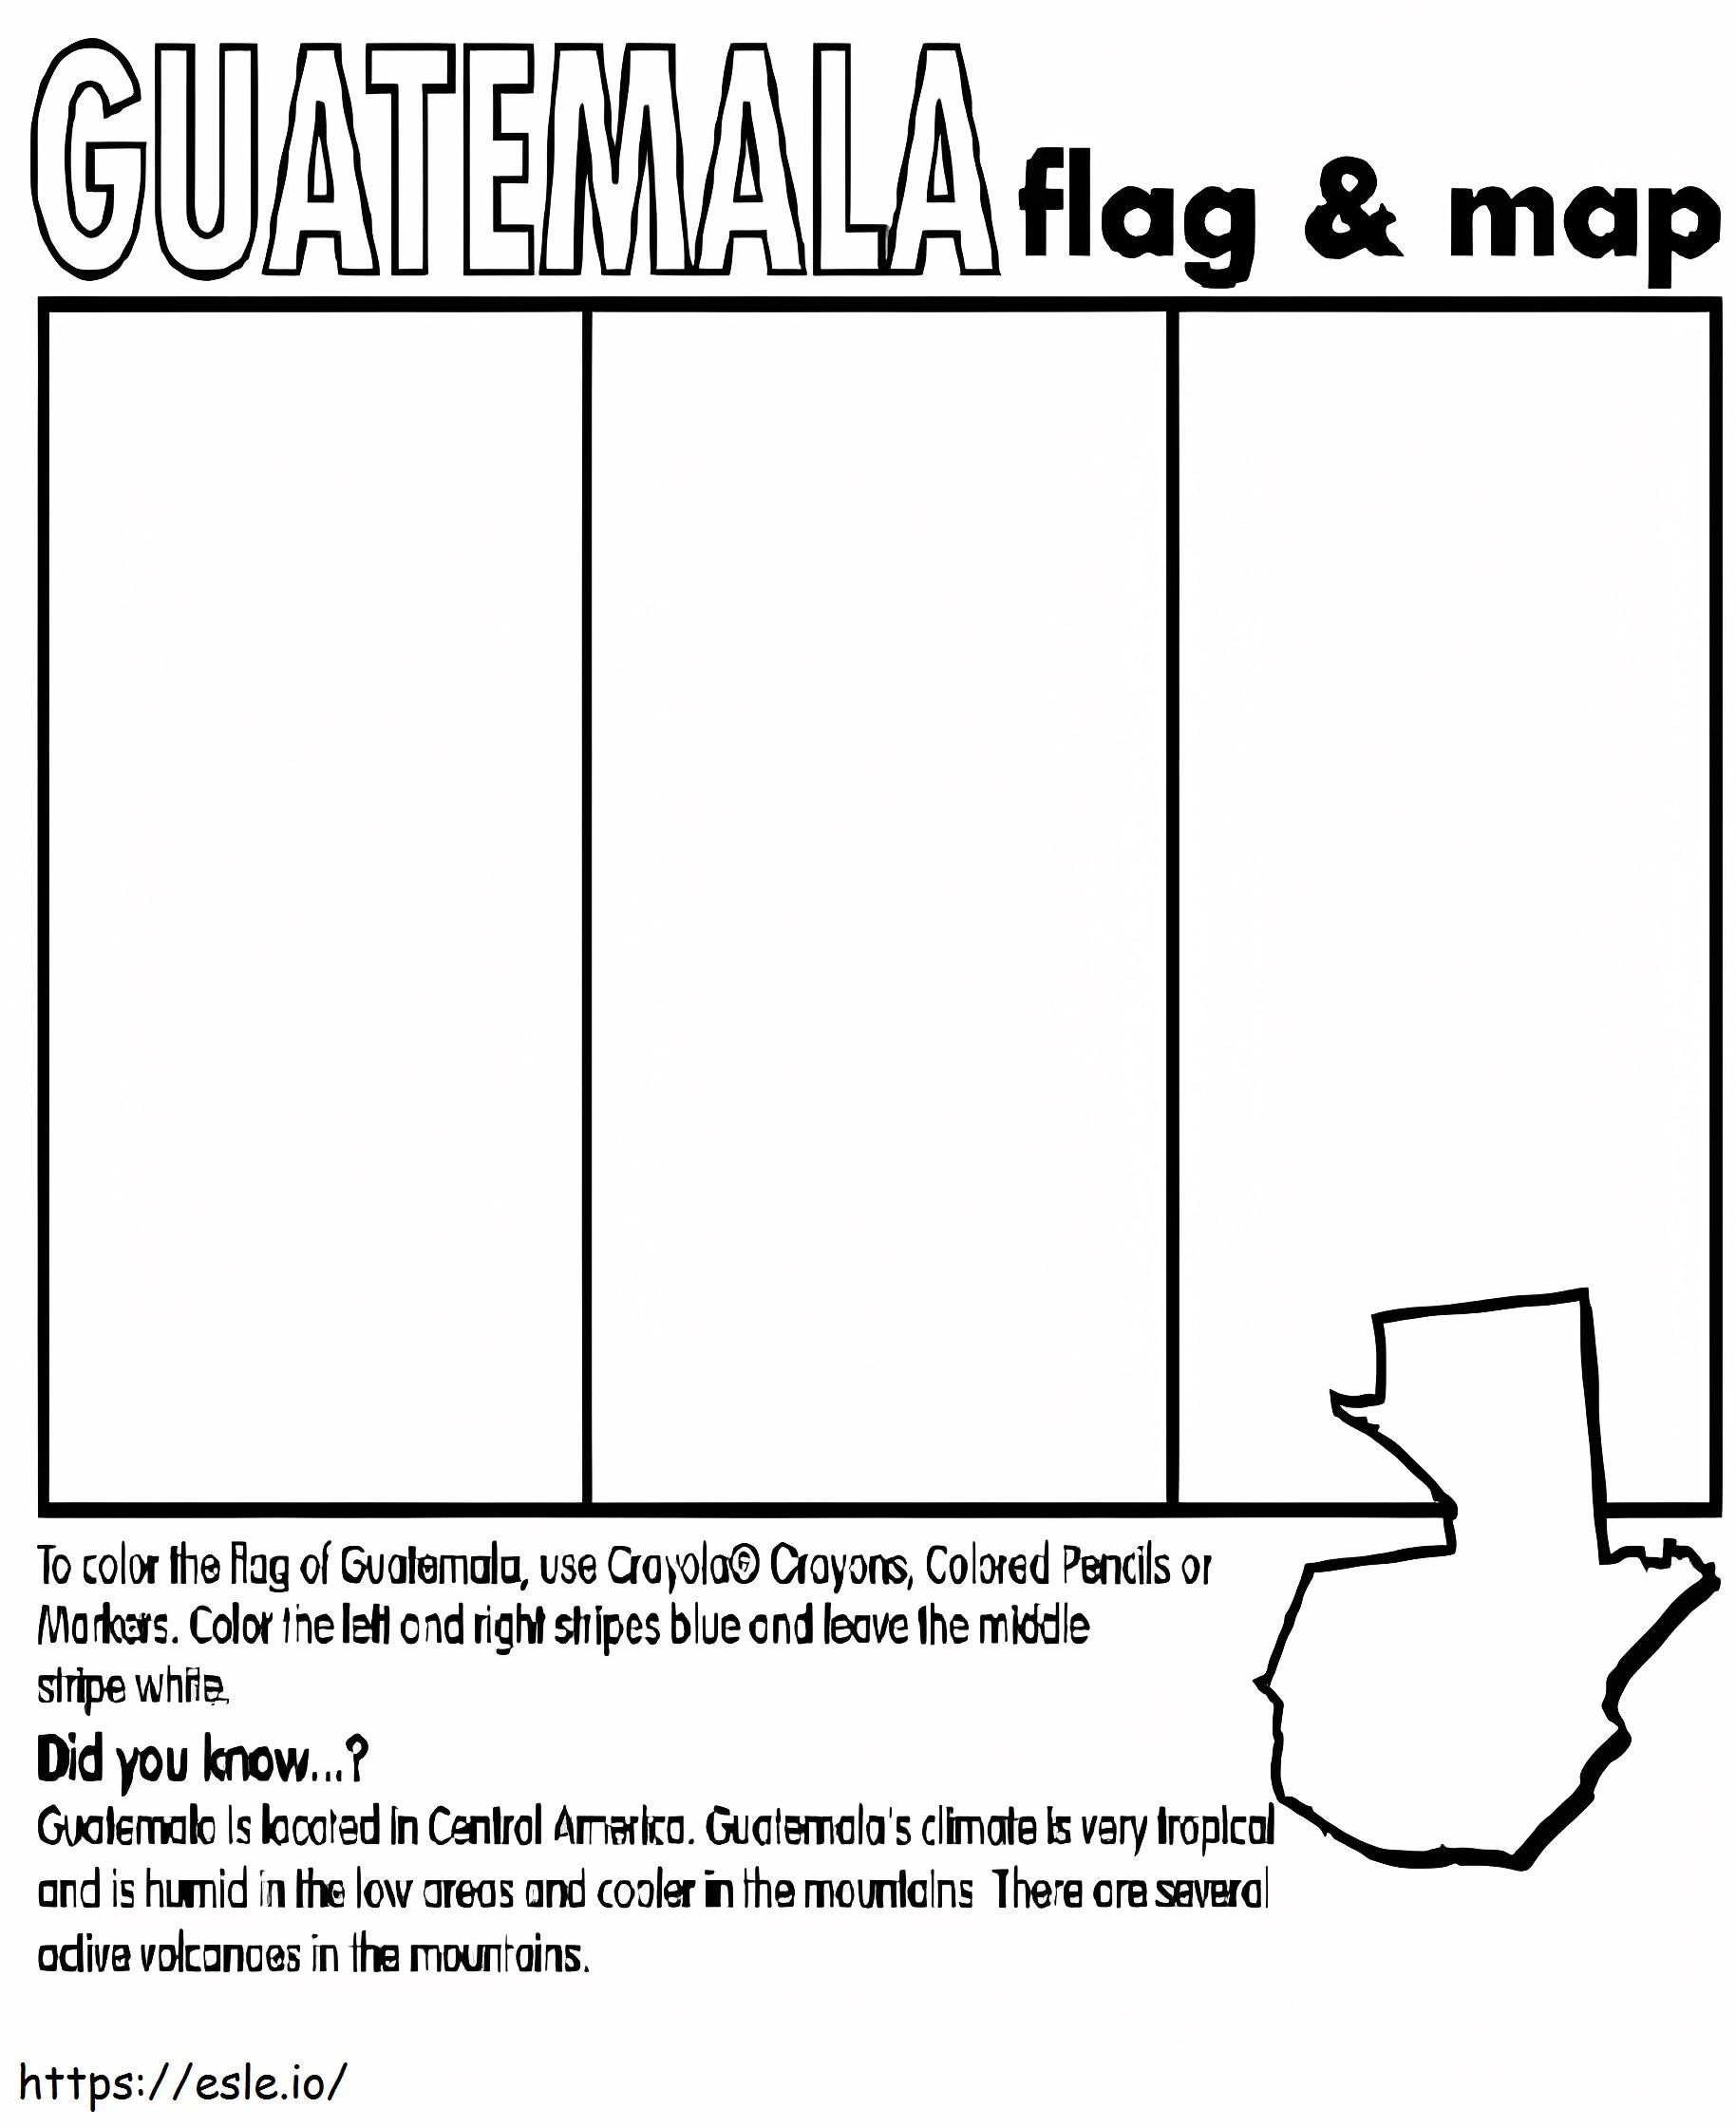 Guatemala Flag And Map coloring page